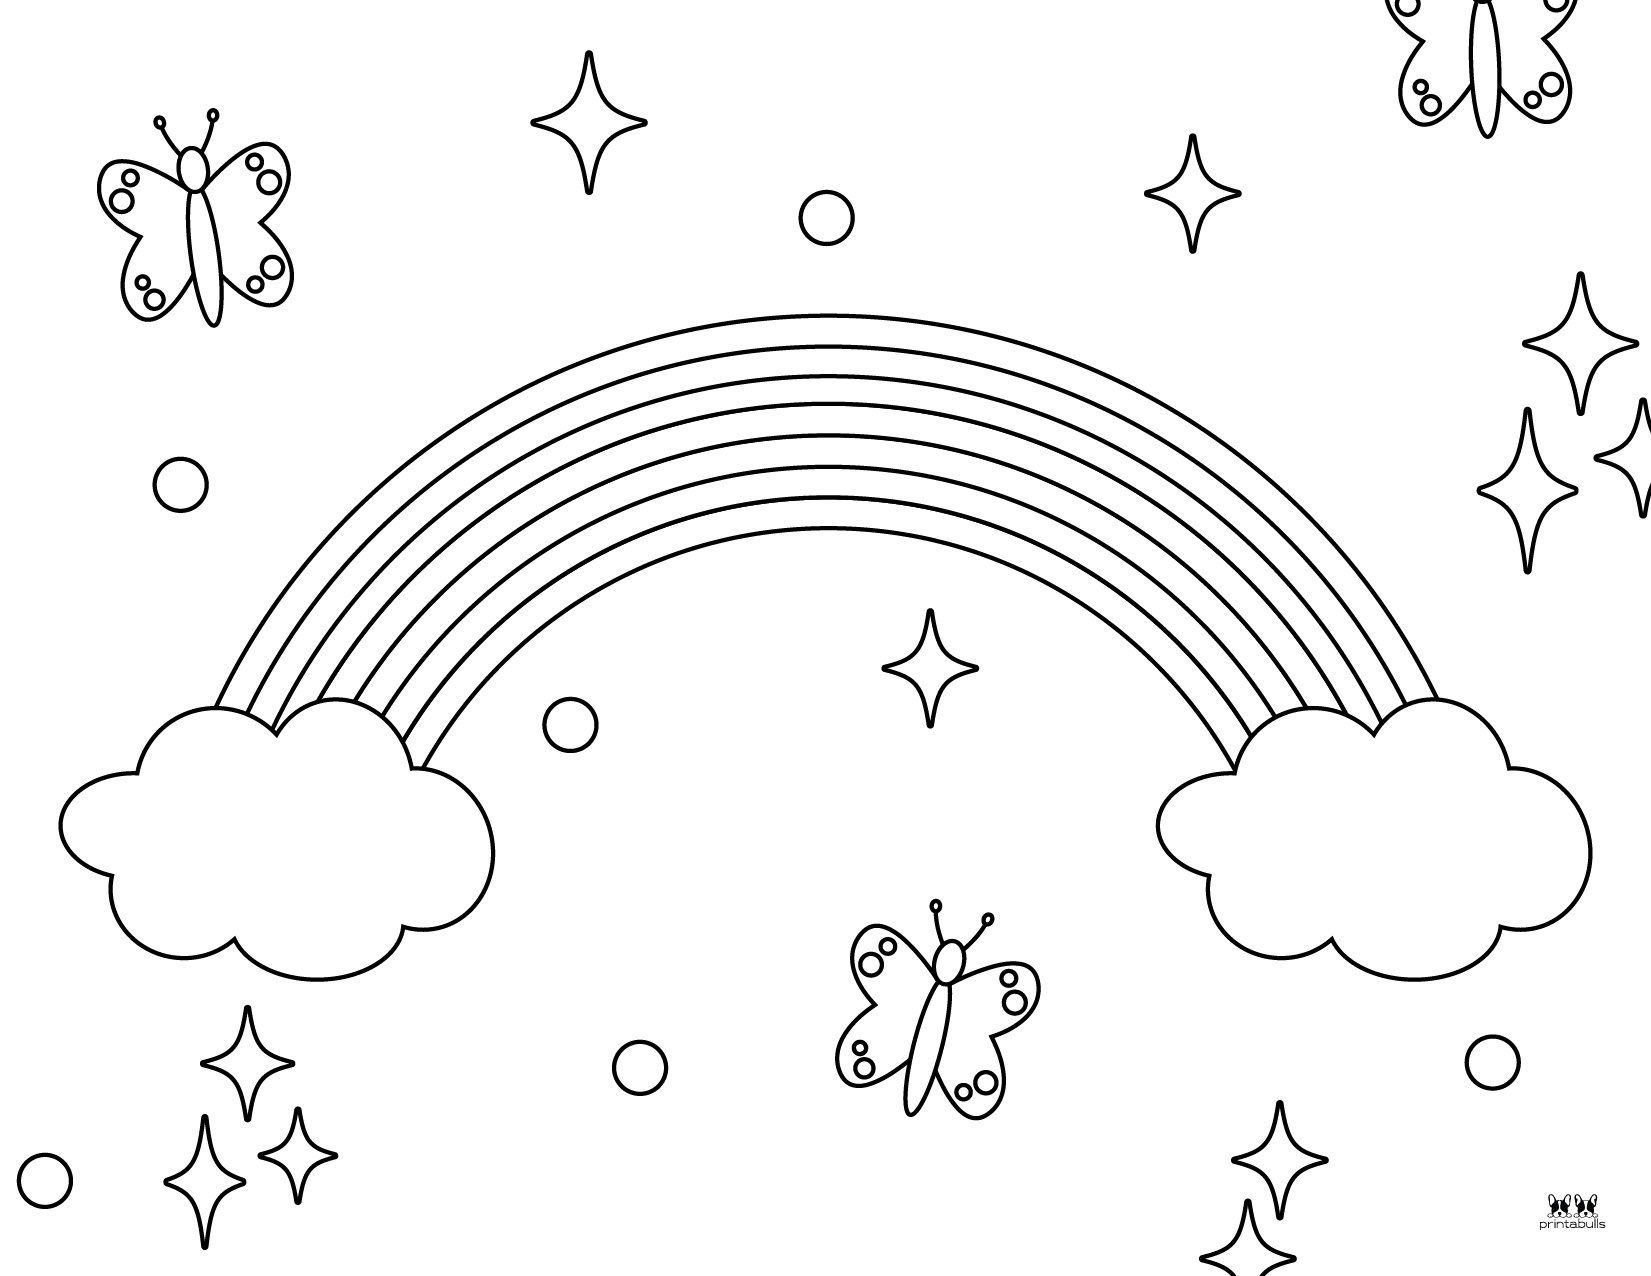 rainbows-coloring-pages-instant-download-printable-etsy-gambaran